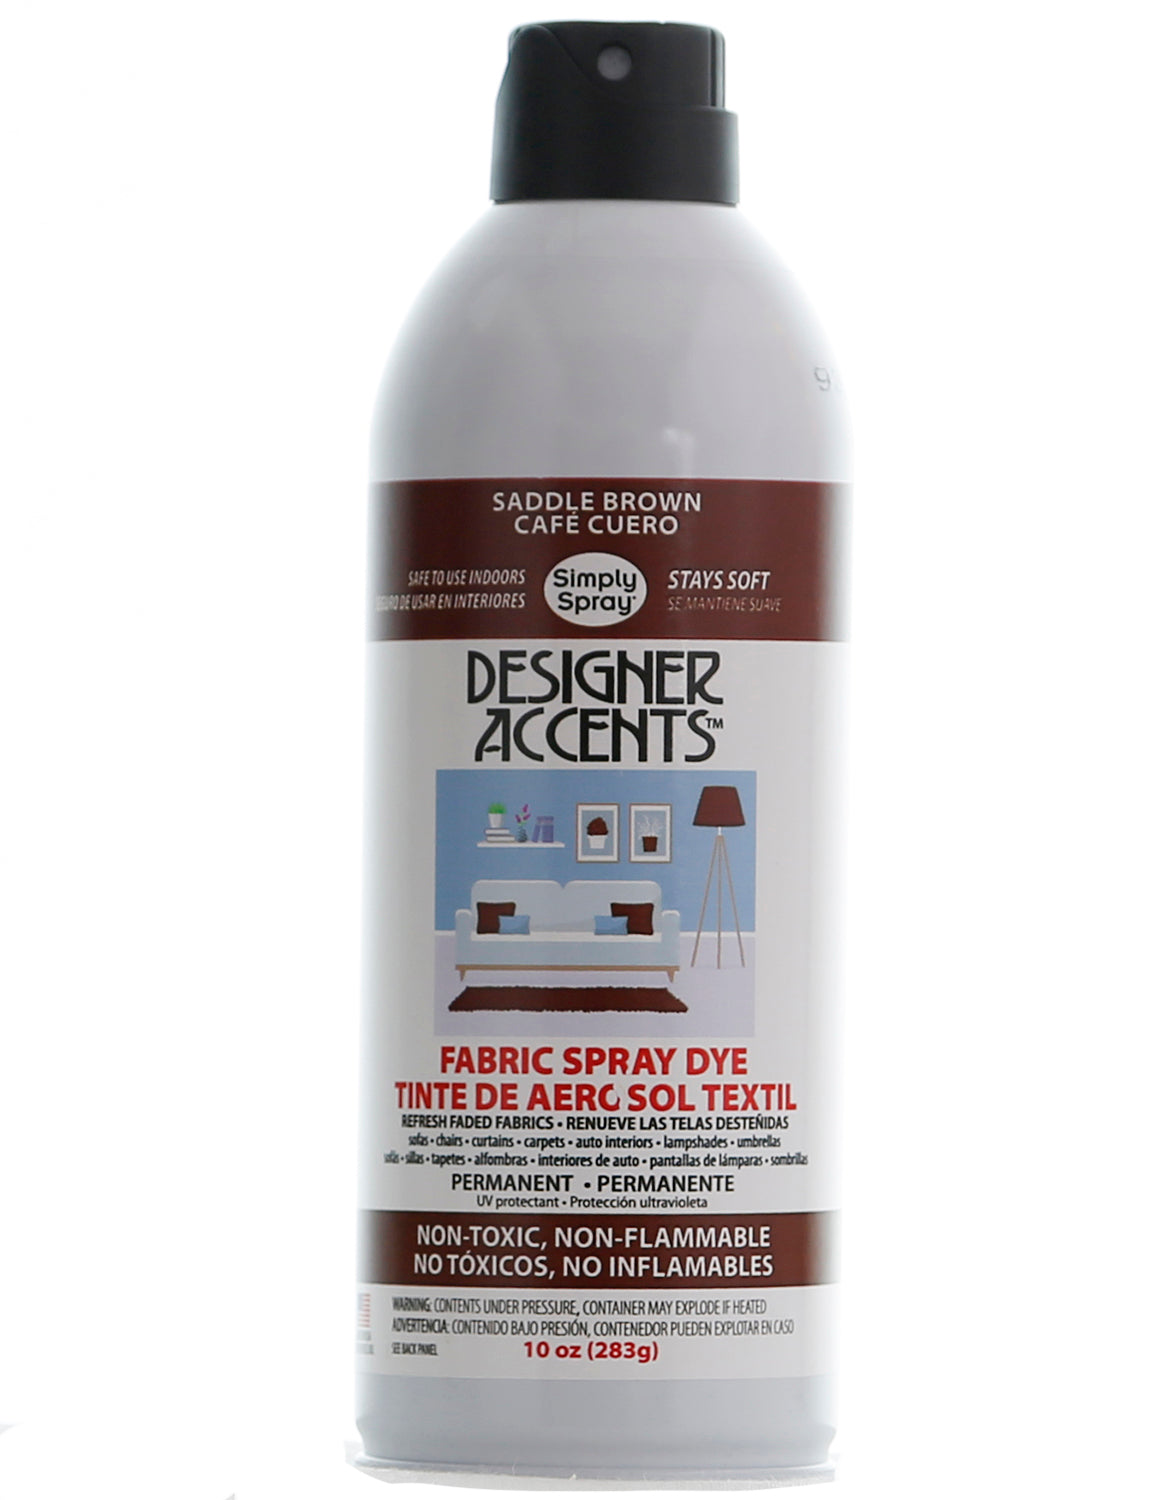 Designer Accents Fabric Paint Spray Dye by Simply Spray - Saddle Brown